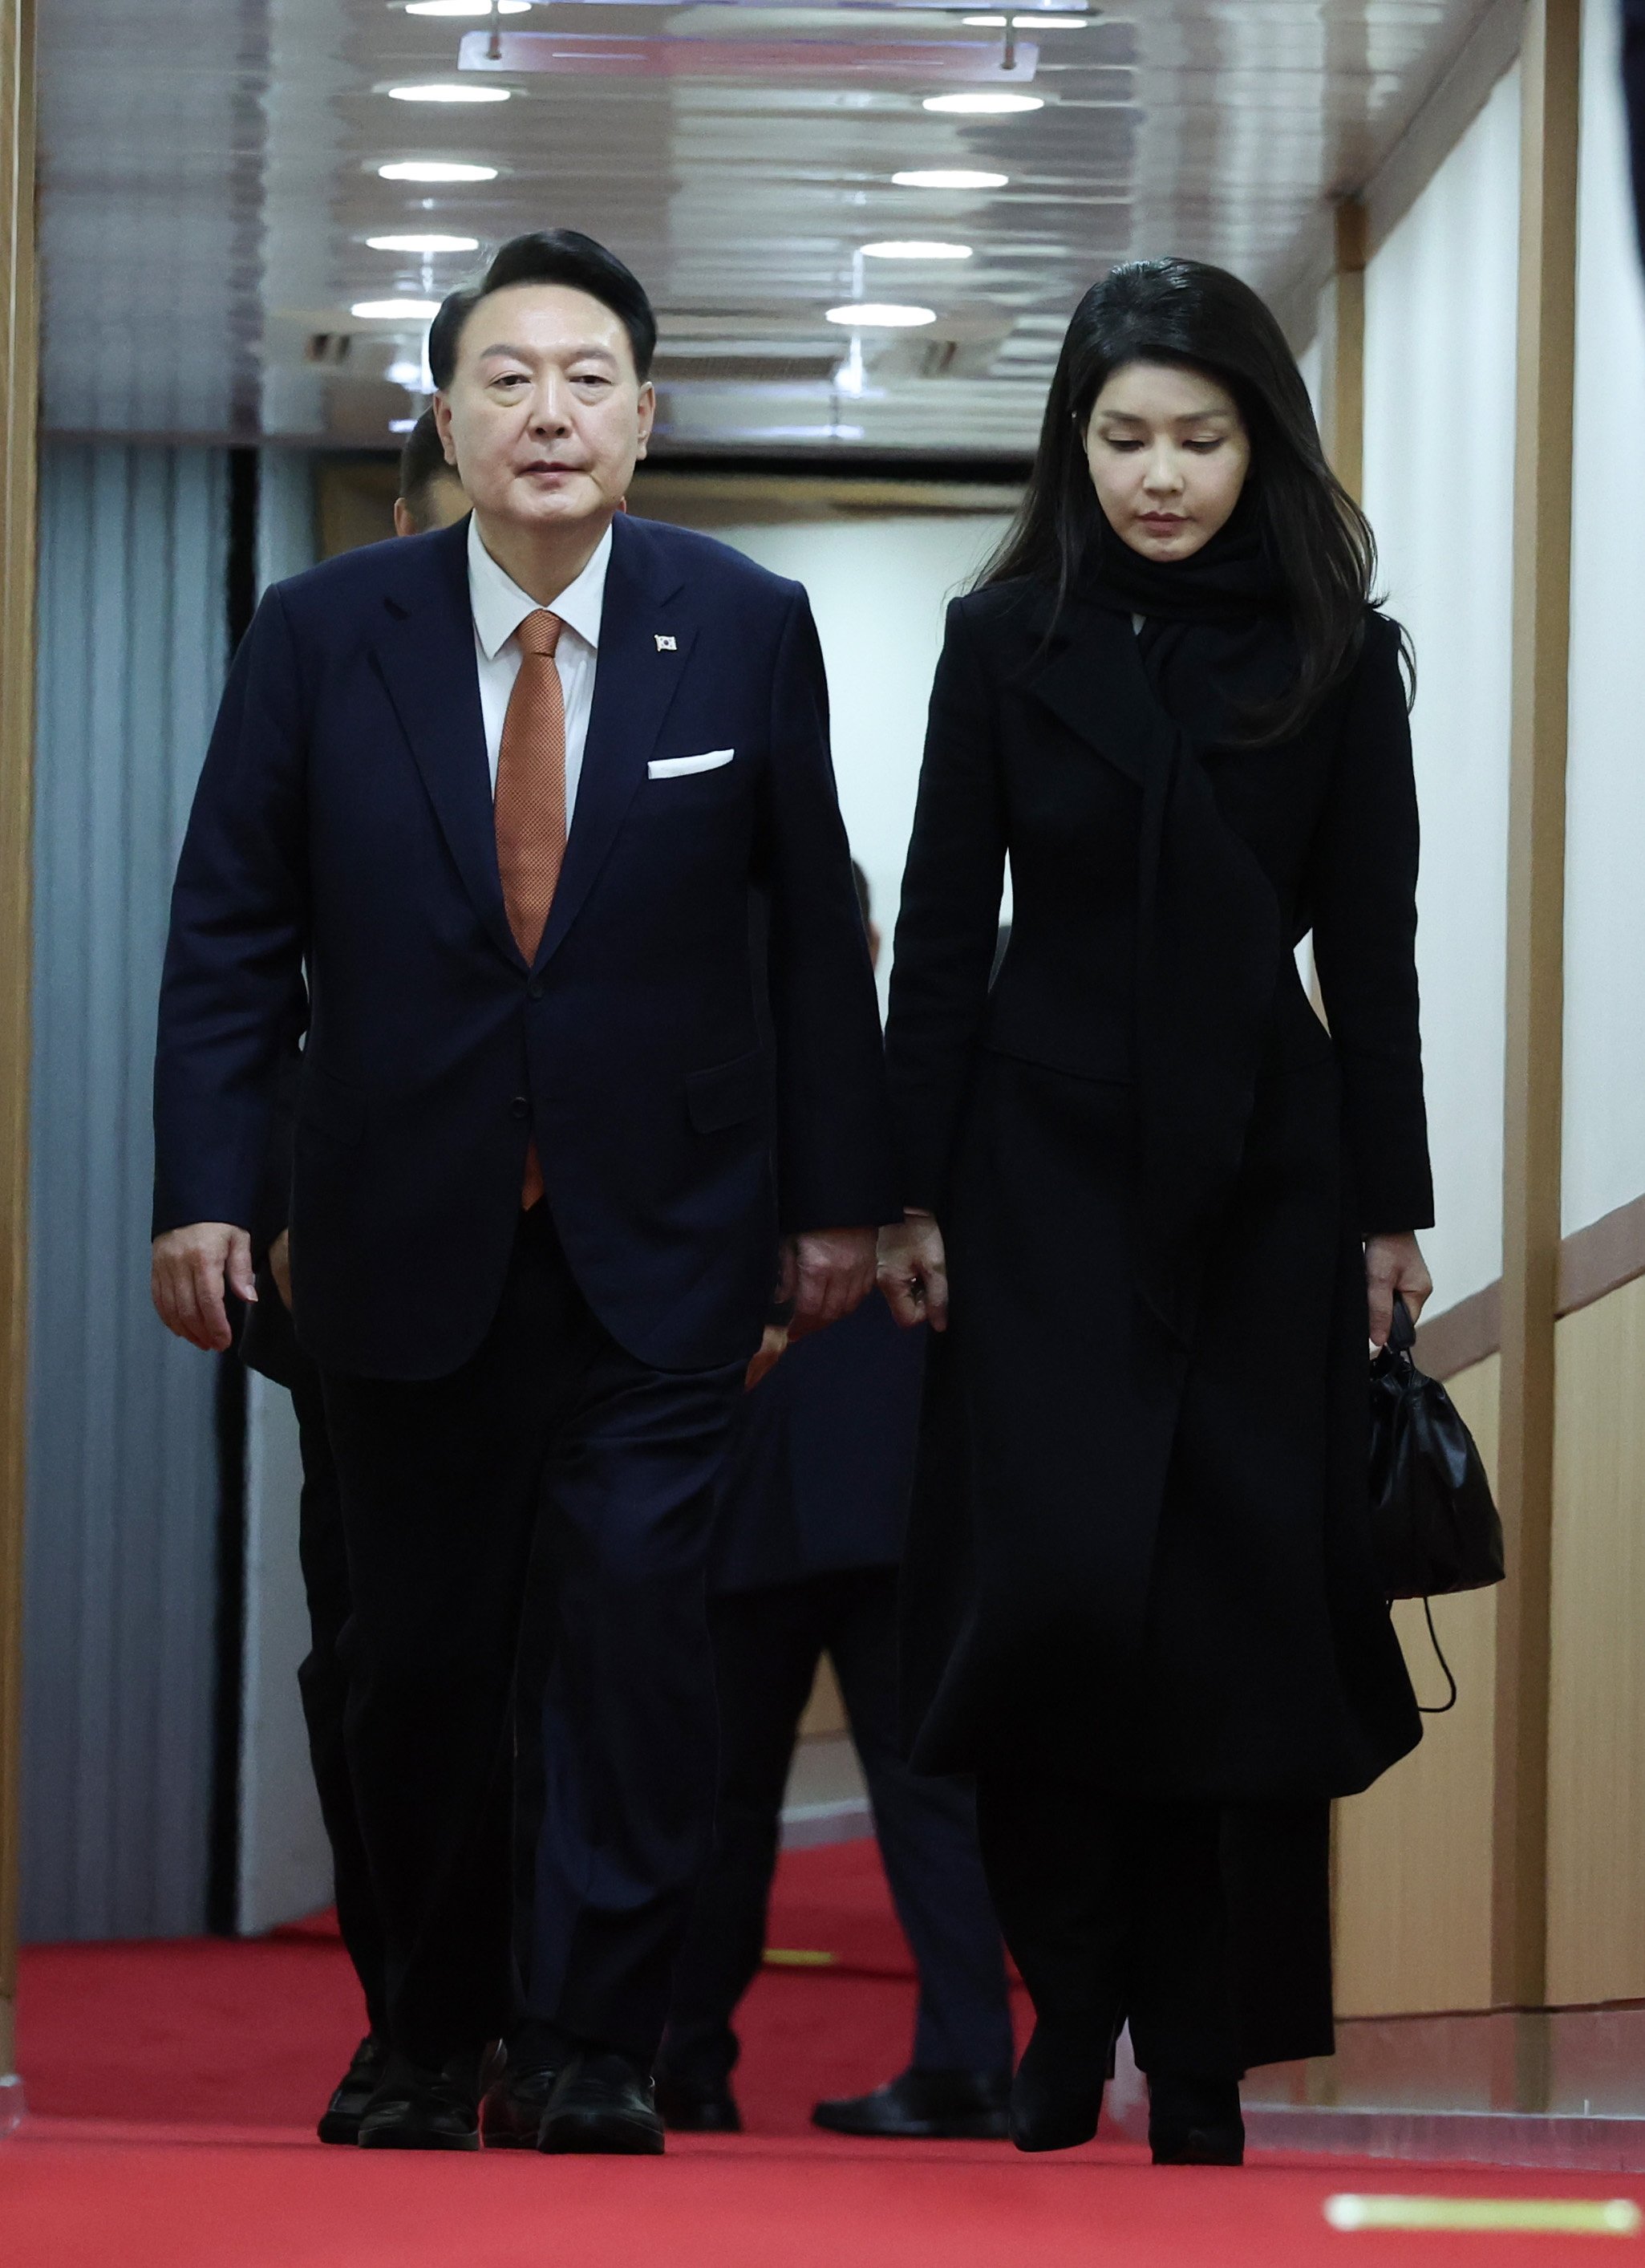 South Korean President Yoon Suk-yeol walks alongside his wife, Kim Keon Hee, as they arrive at Seoul Air Base on December 15 after finishing a four-day state visit to the Netherlands. Photo: Yonhap/via EPA-EFE